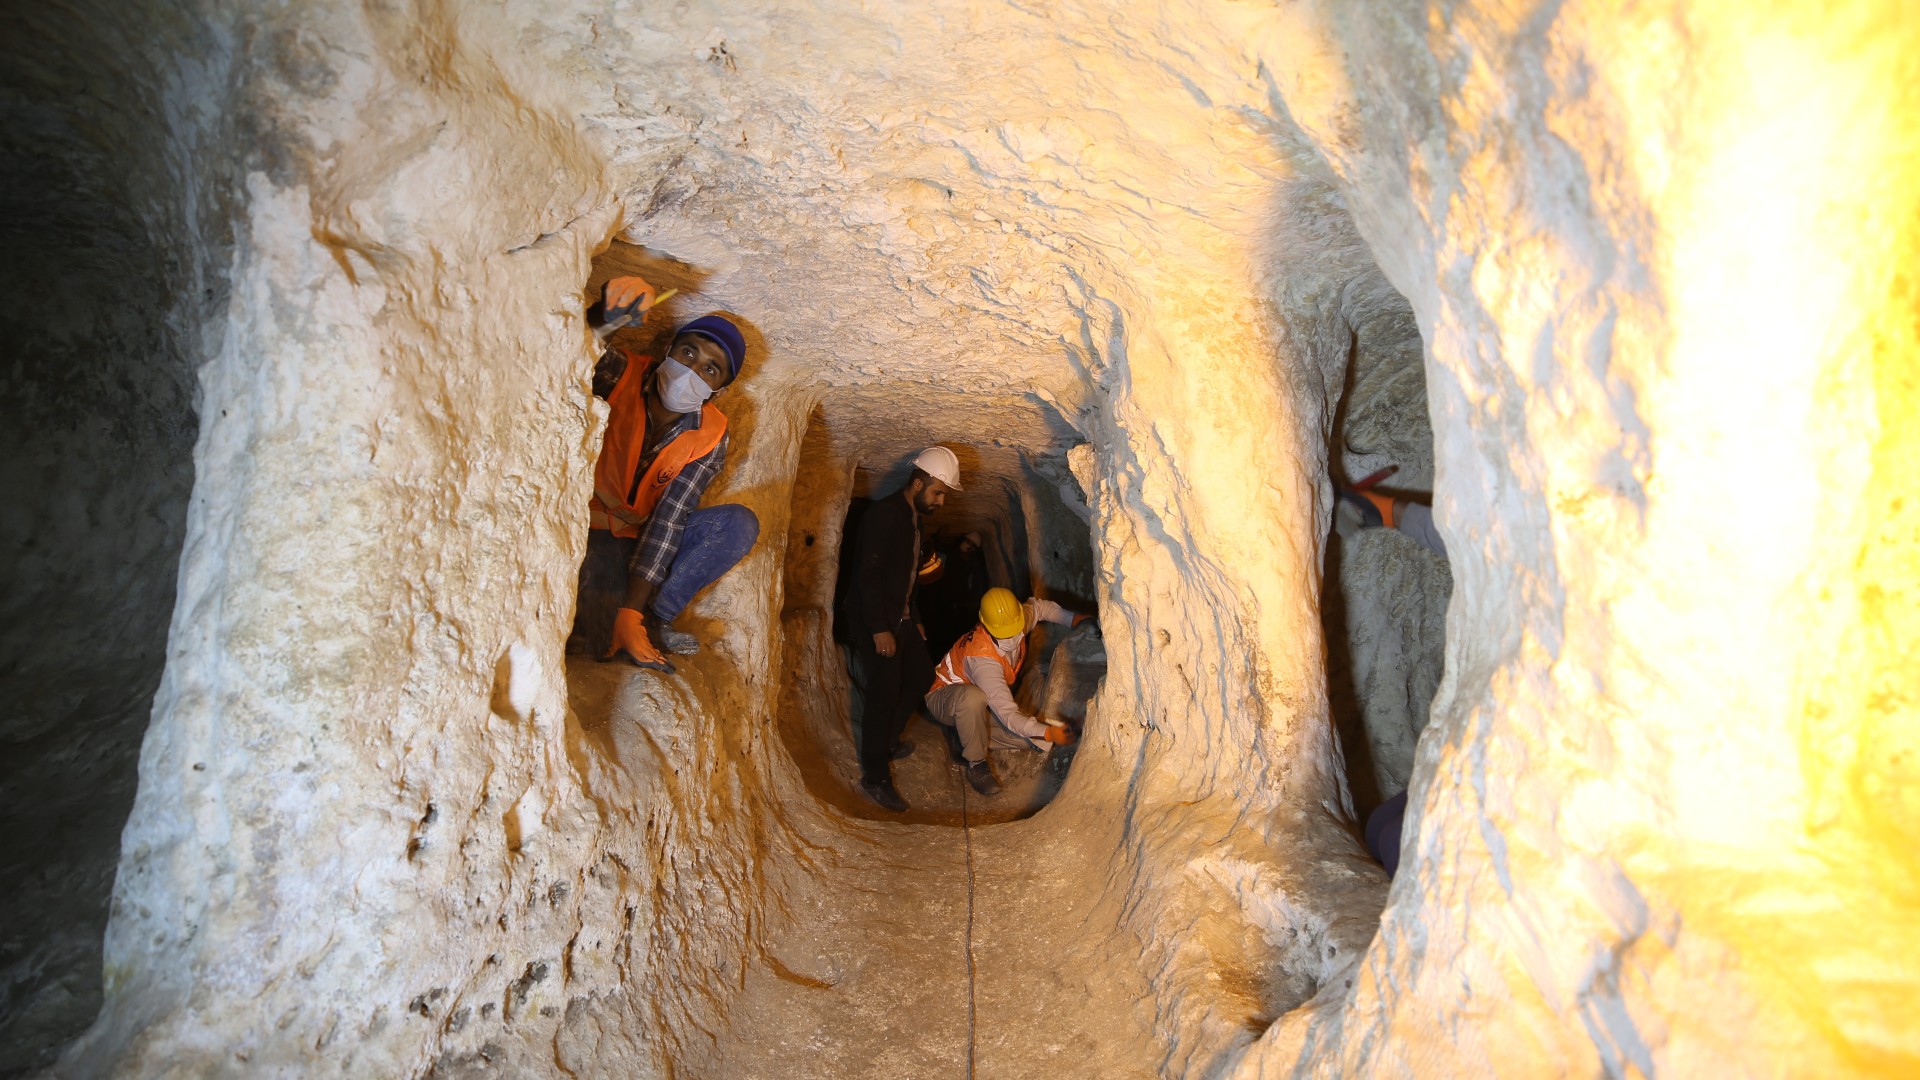 A team of 3 people who are wearing hard hats, masks and high visibility safety vests are exploring a brightly lit tunnel of an underground cave thought to be a city.